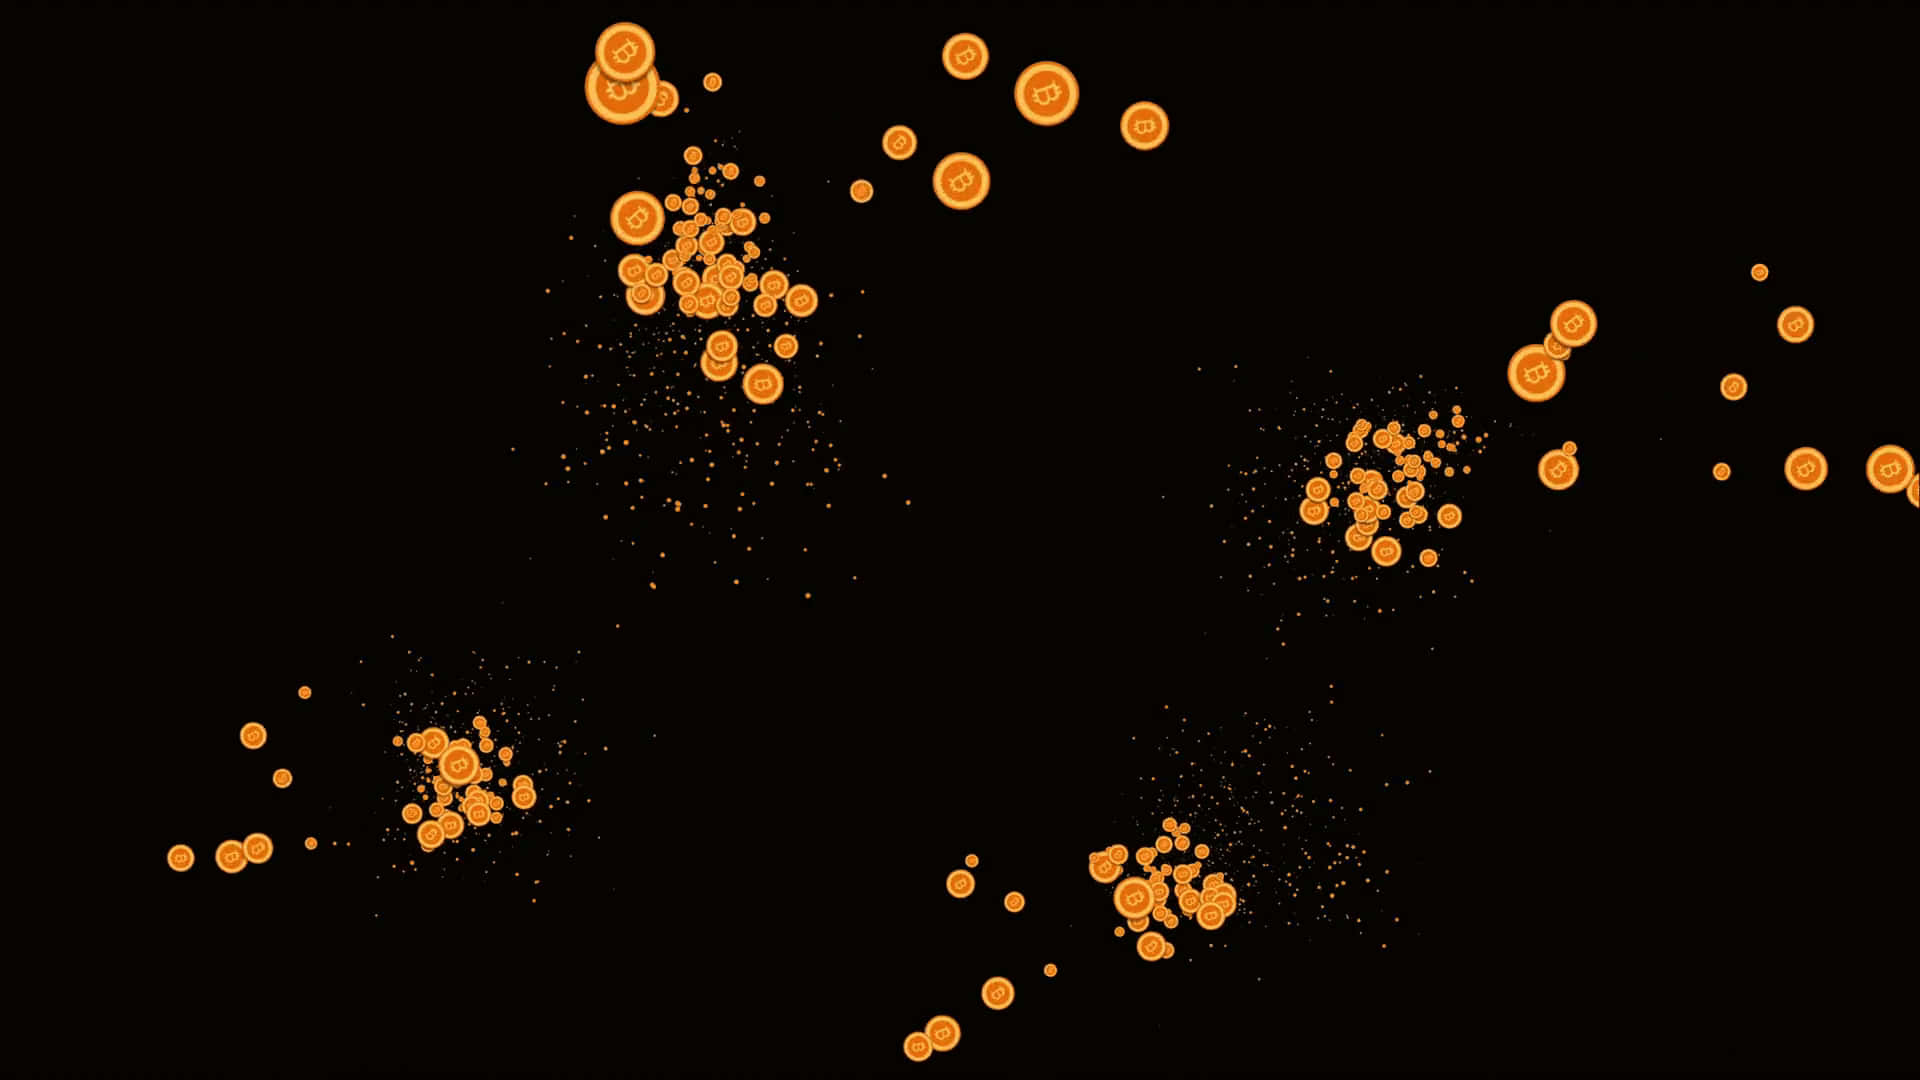 A Black Background With Orange Dots On It Wallpaper